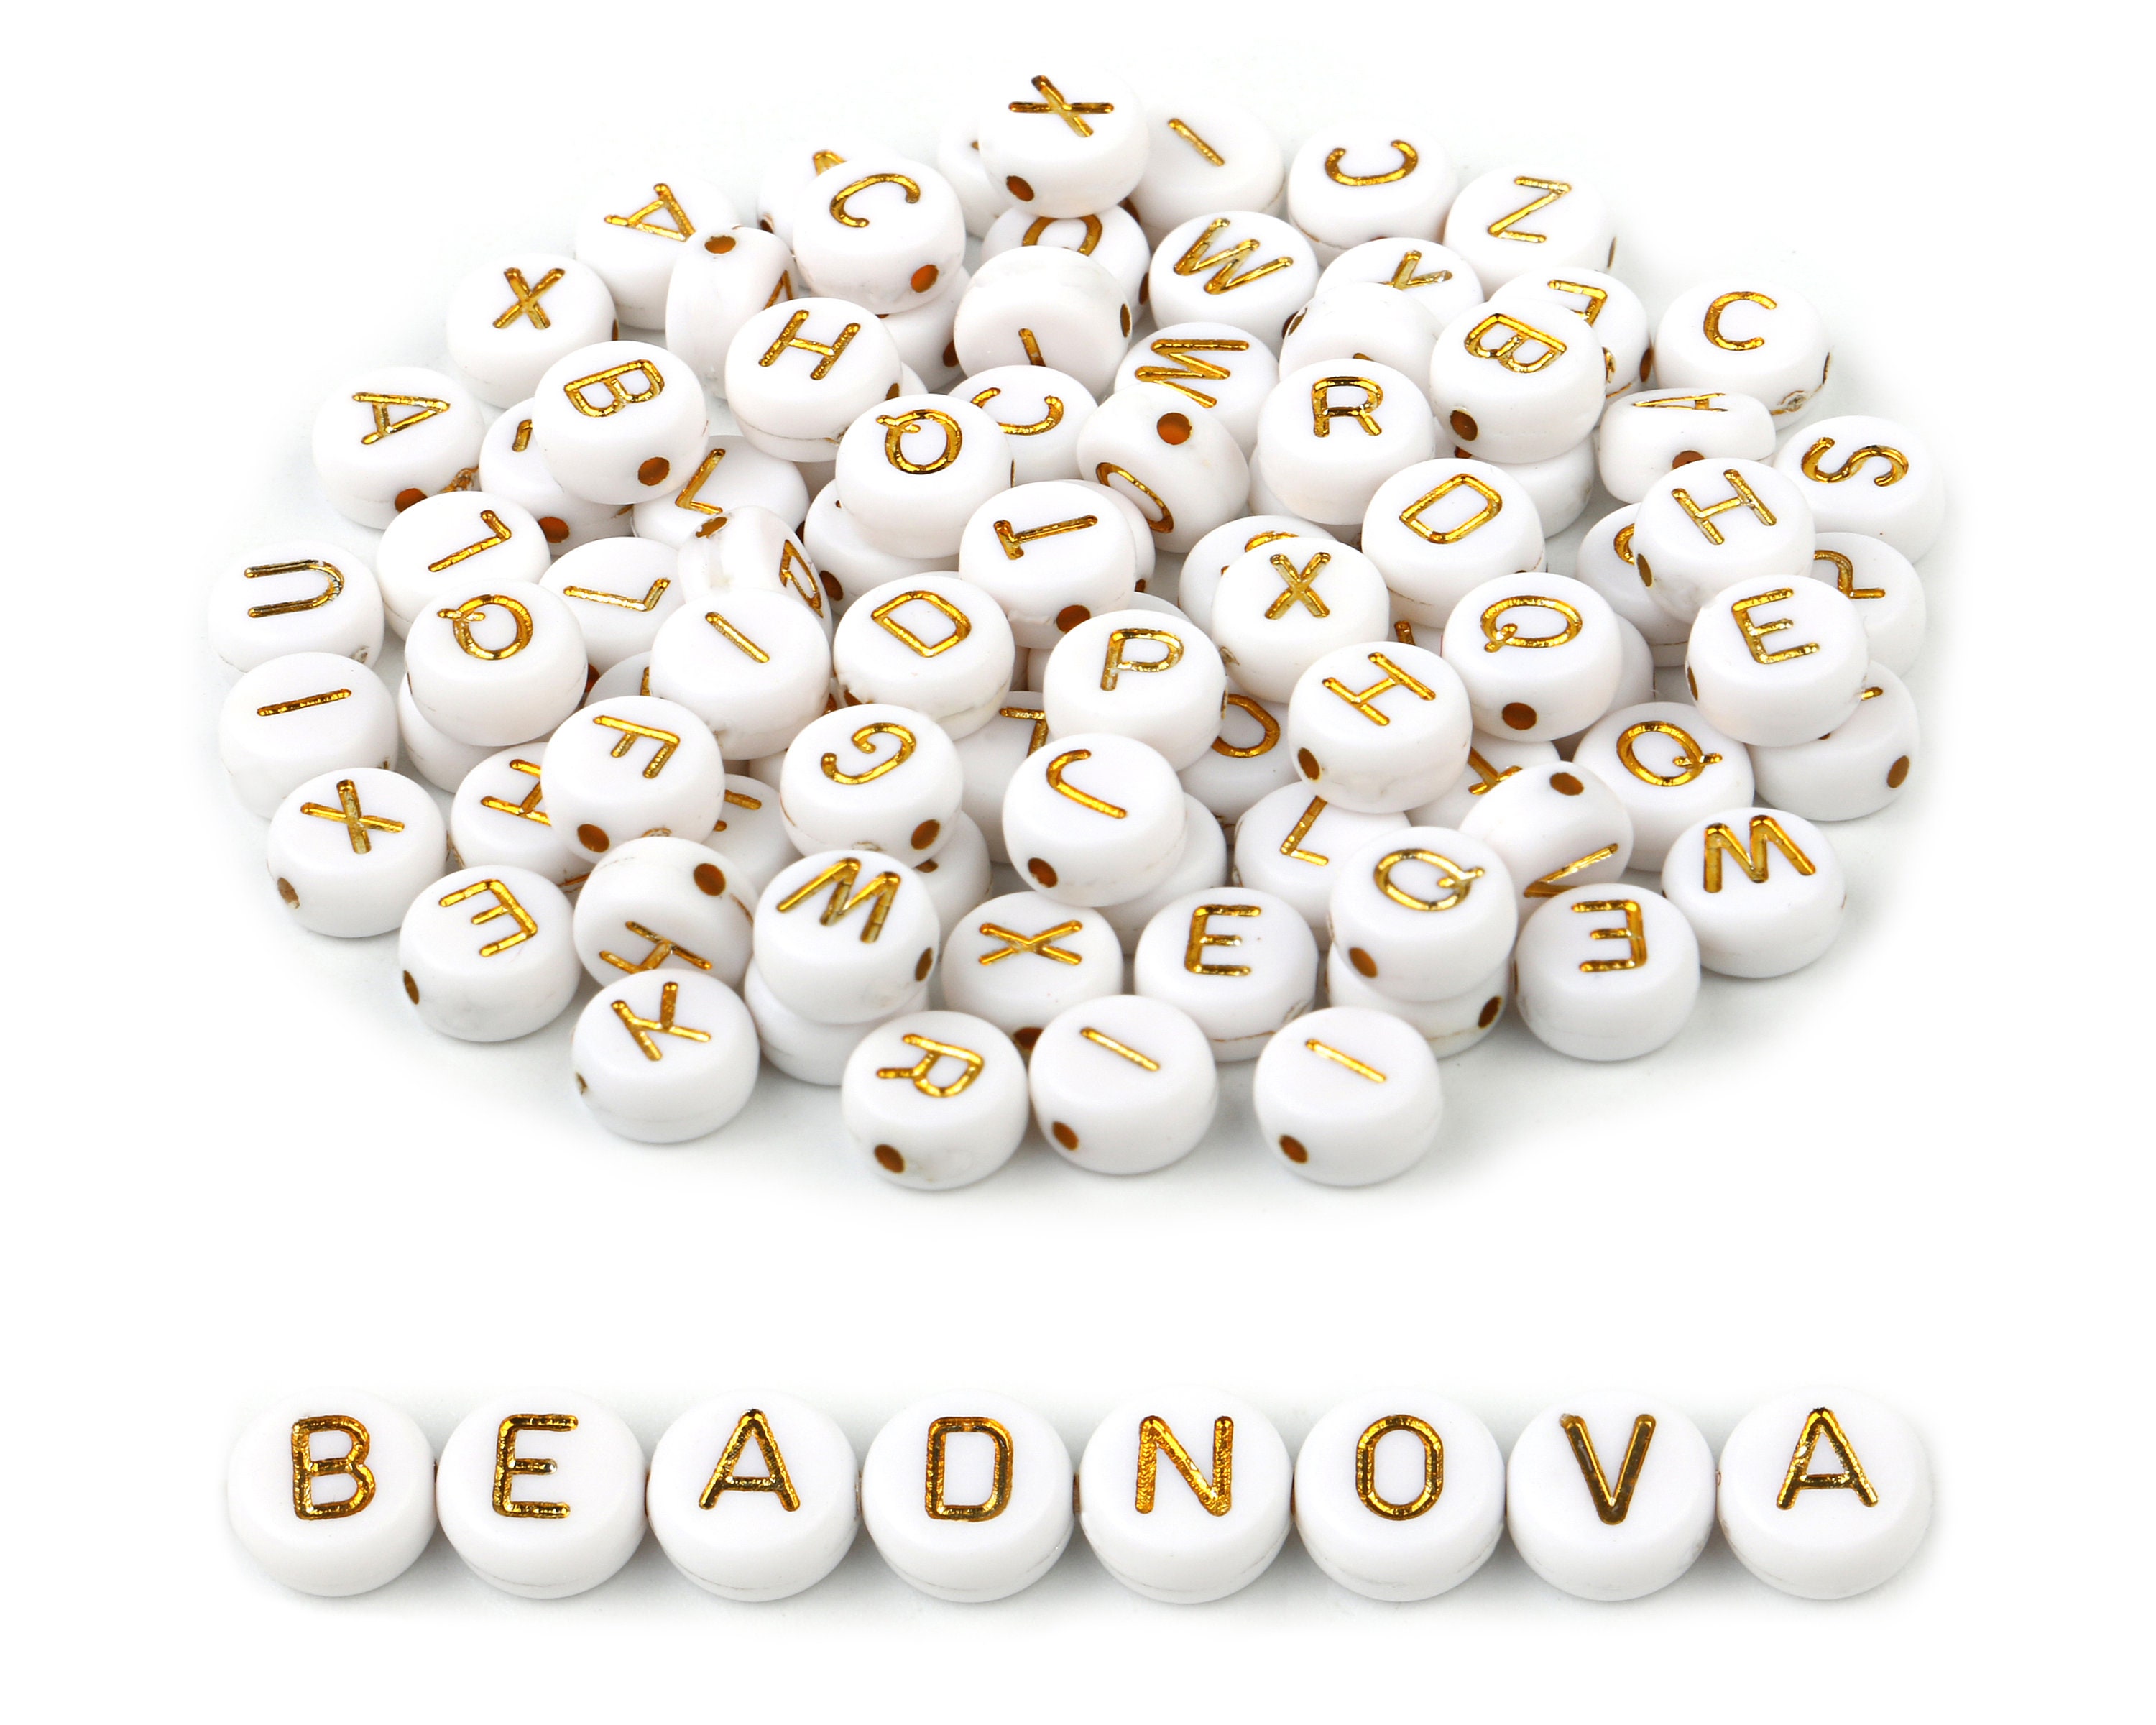 Assorted Letter Beads, 10mm Round, Black with White Letters